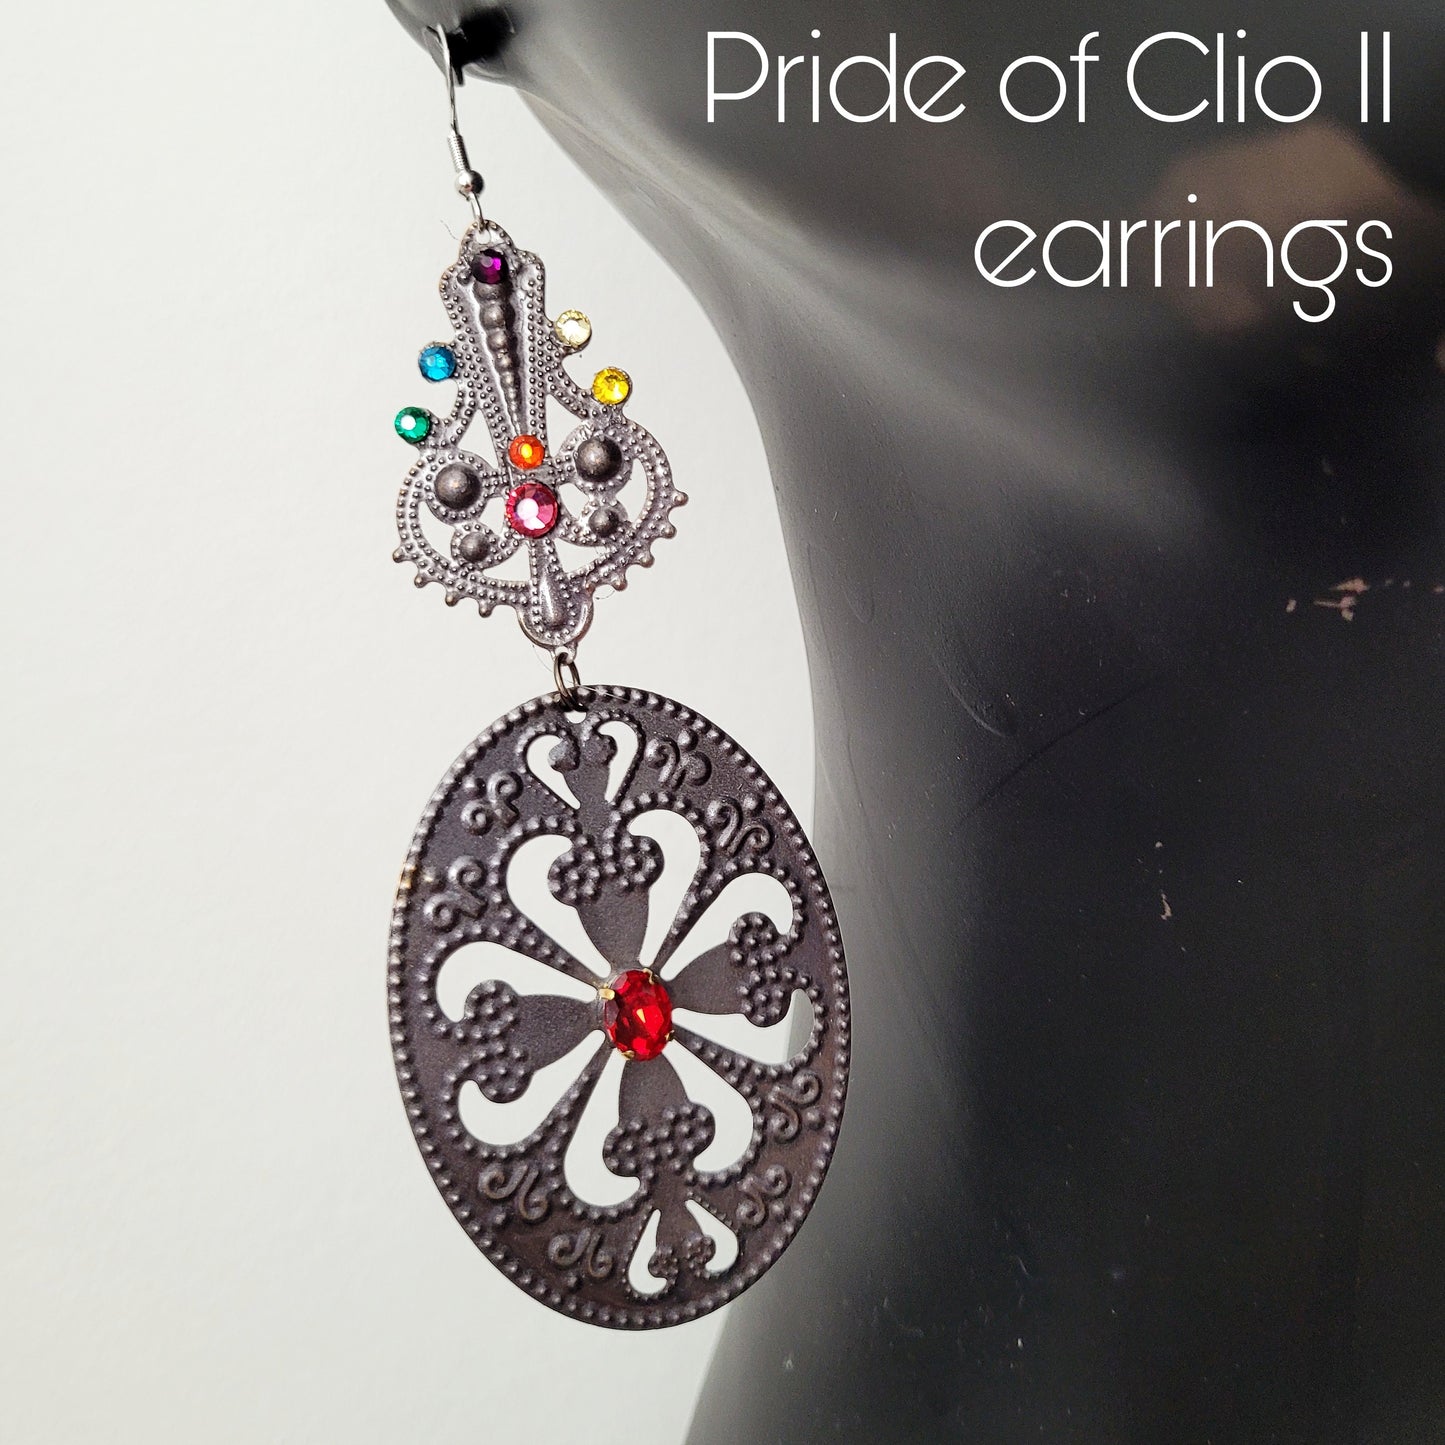 Deusa ex Machina collection: The Pride of Clio earrings